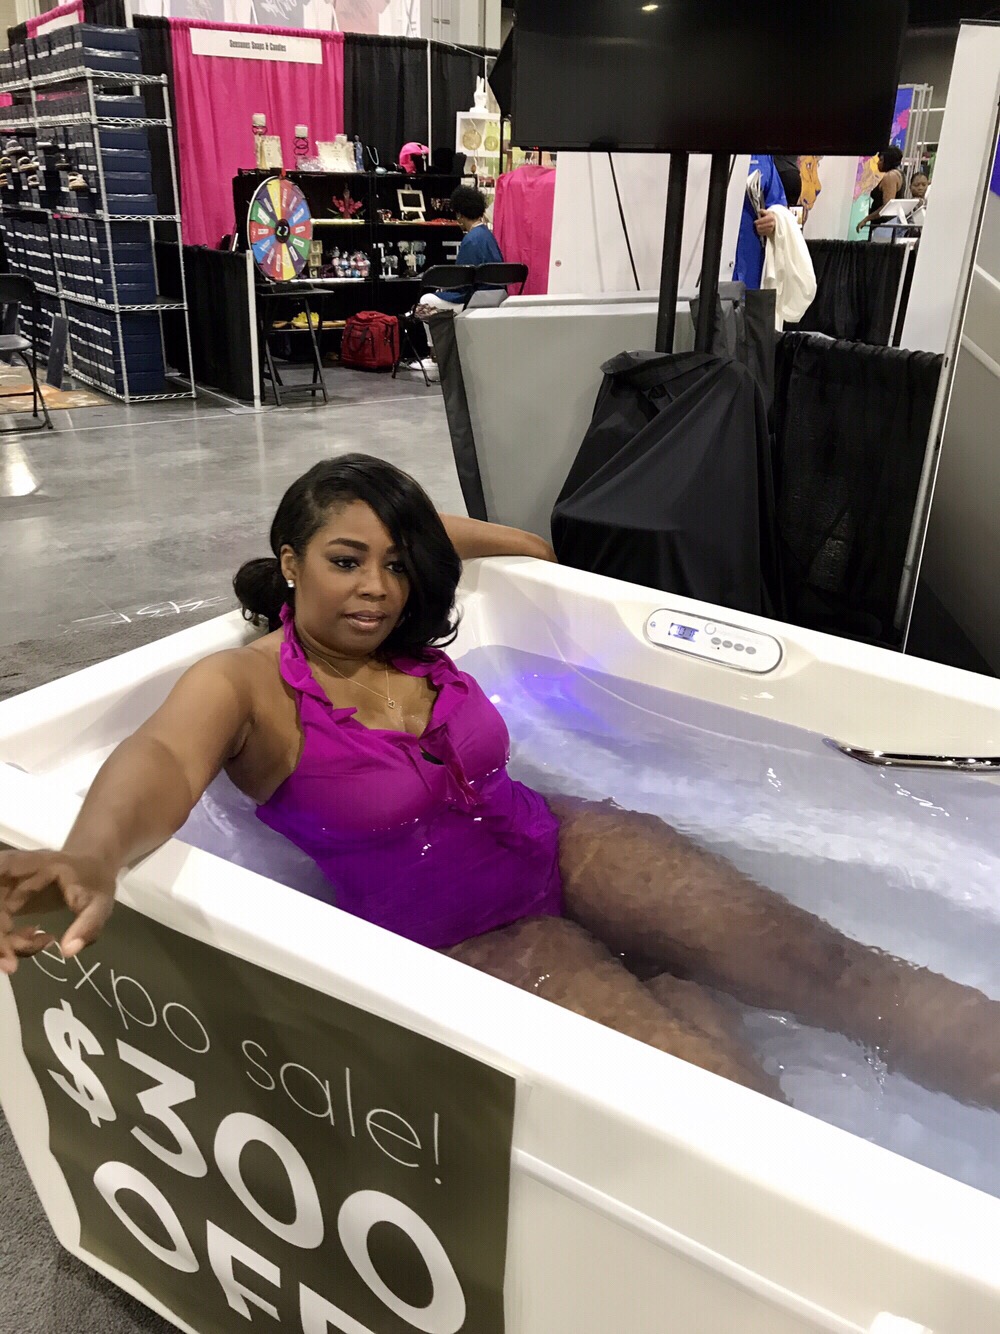 My Experience Trying Out The Oxygen Beauty Spa